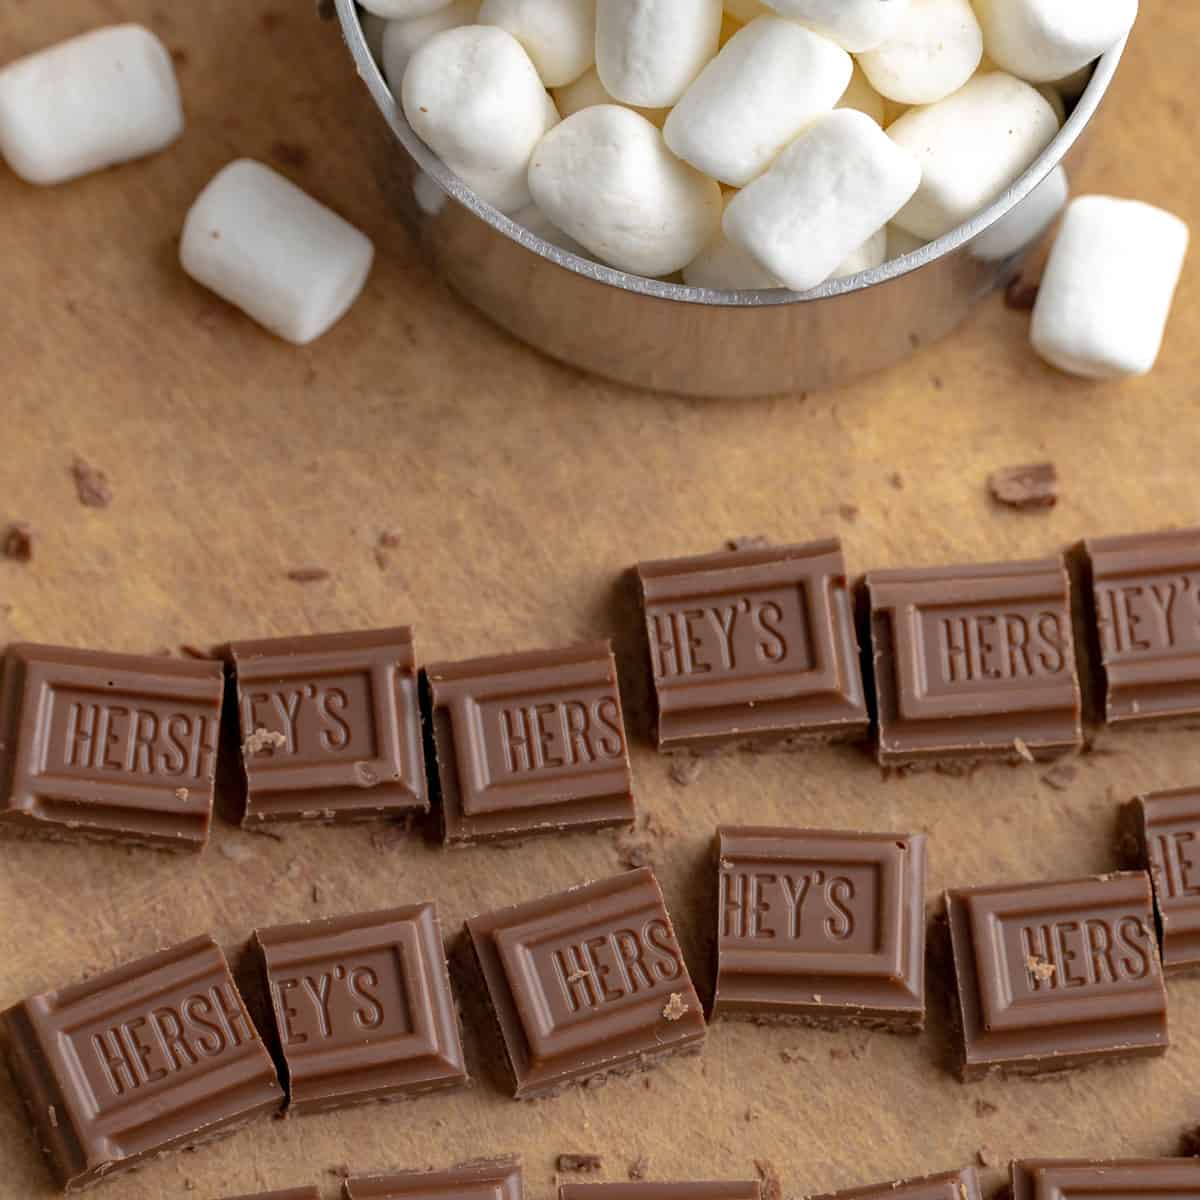 cut up chocolate candy bars on a cutting board. Marshmallows in the background